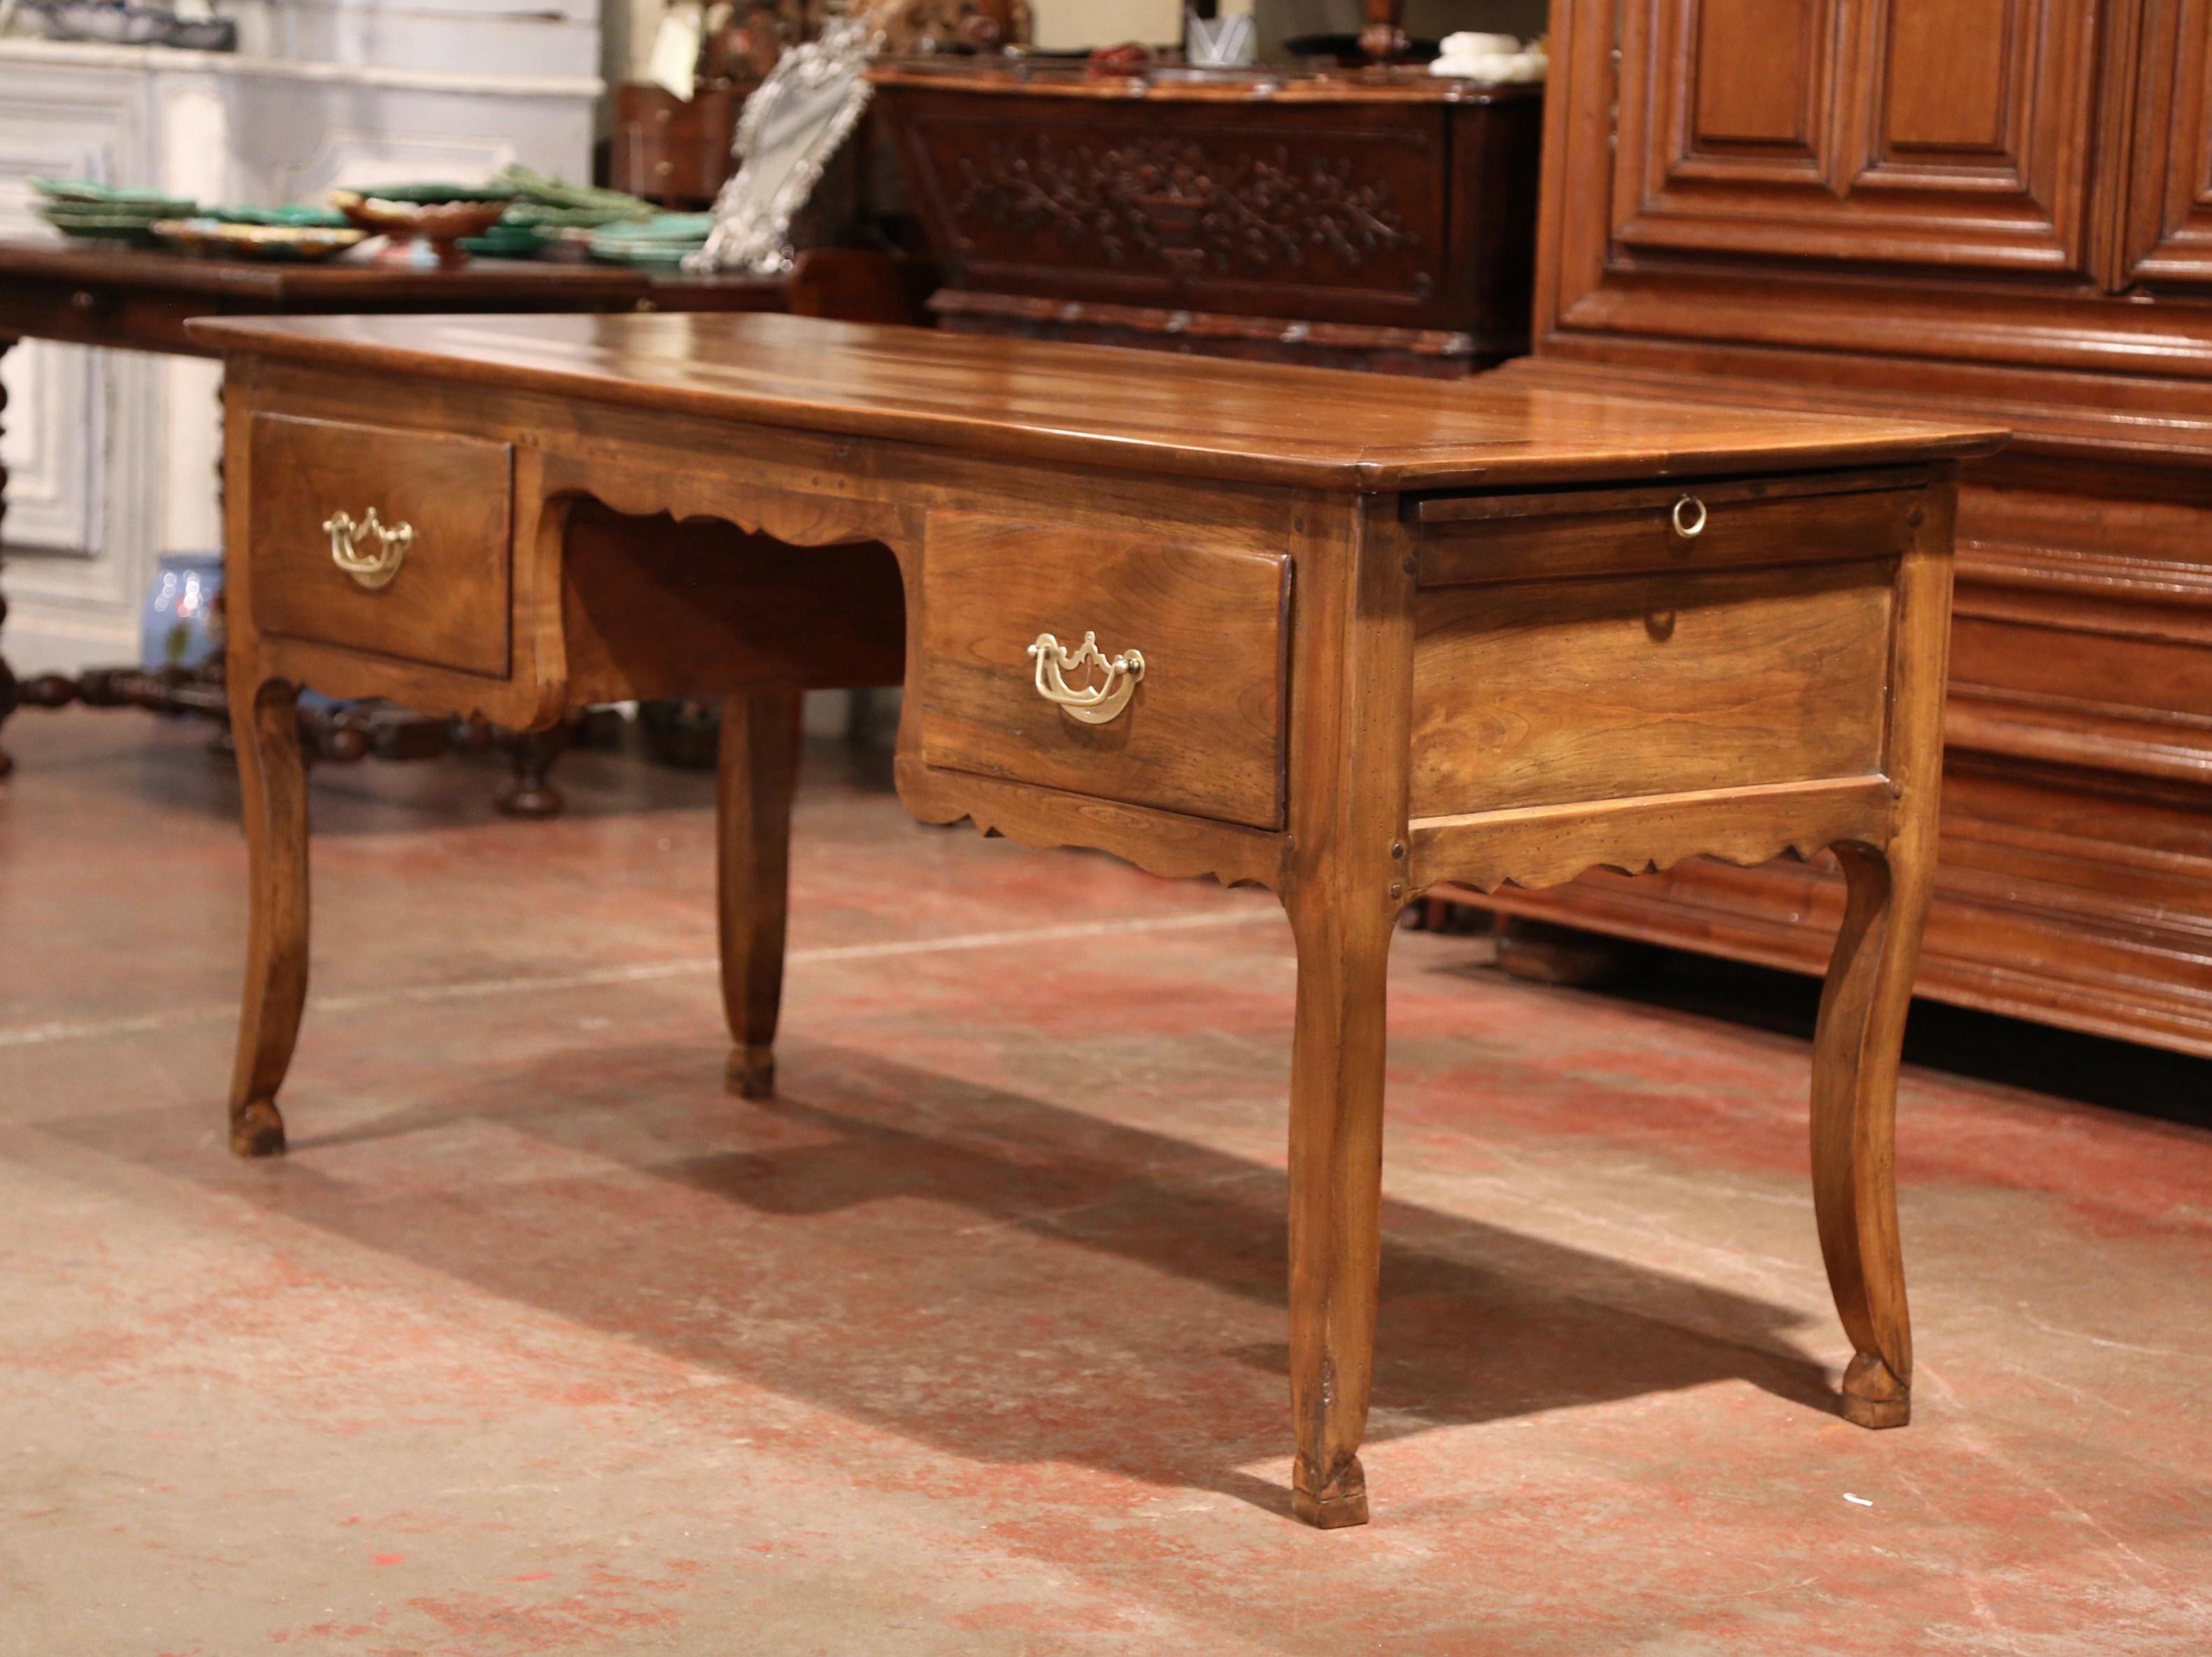 This elegant antique fruit wood desk was created in the Poitou region of France, circa 1870. Made of wild cherry timber, the large writing table sits on four cabriole legs and features a decorative scalloped apron all the way around. The wide